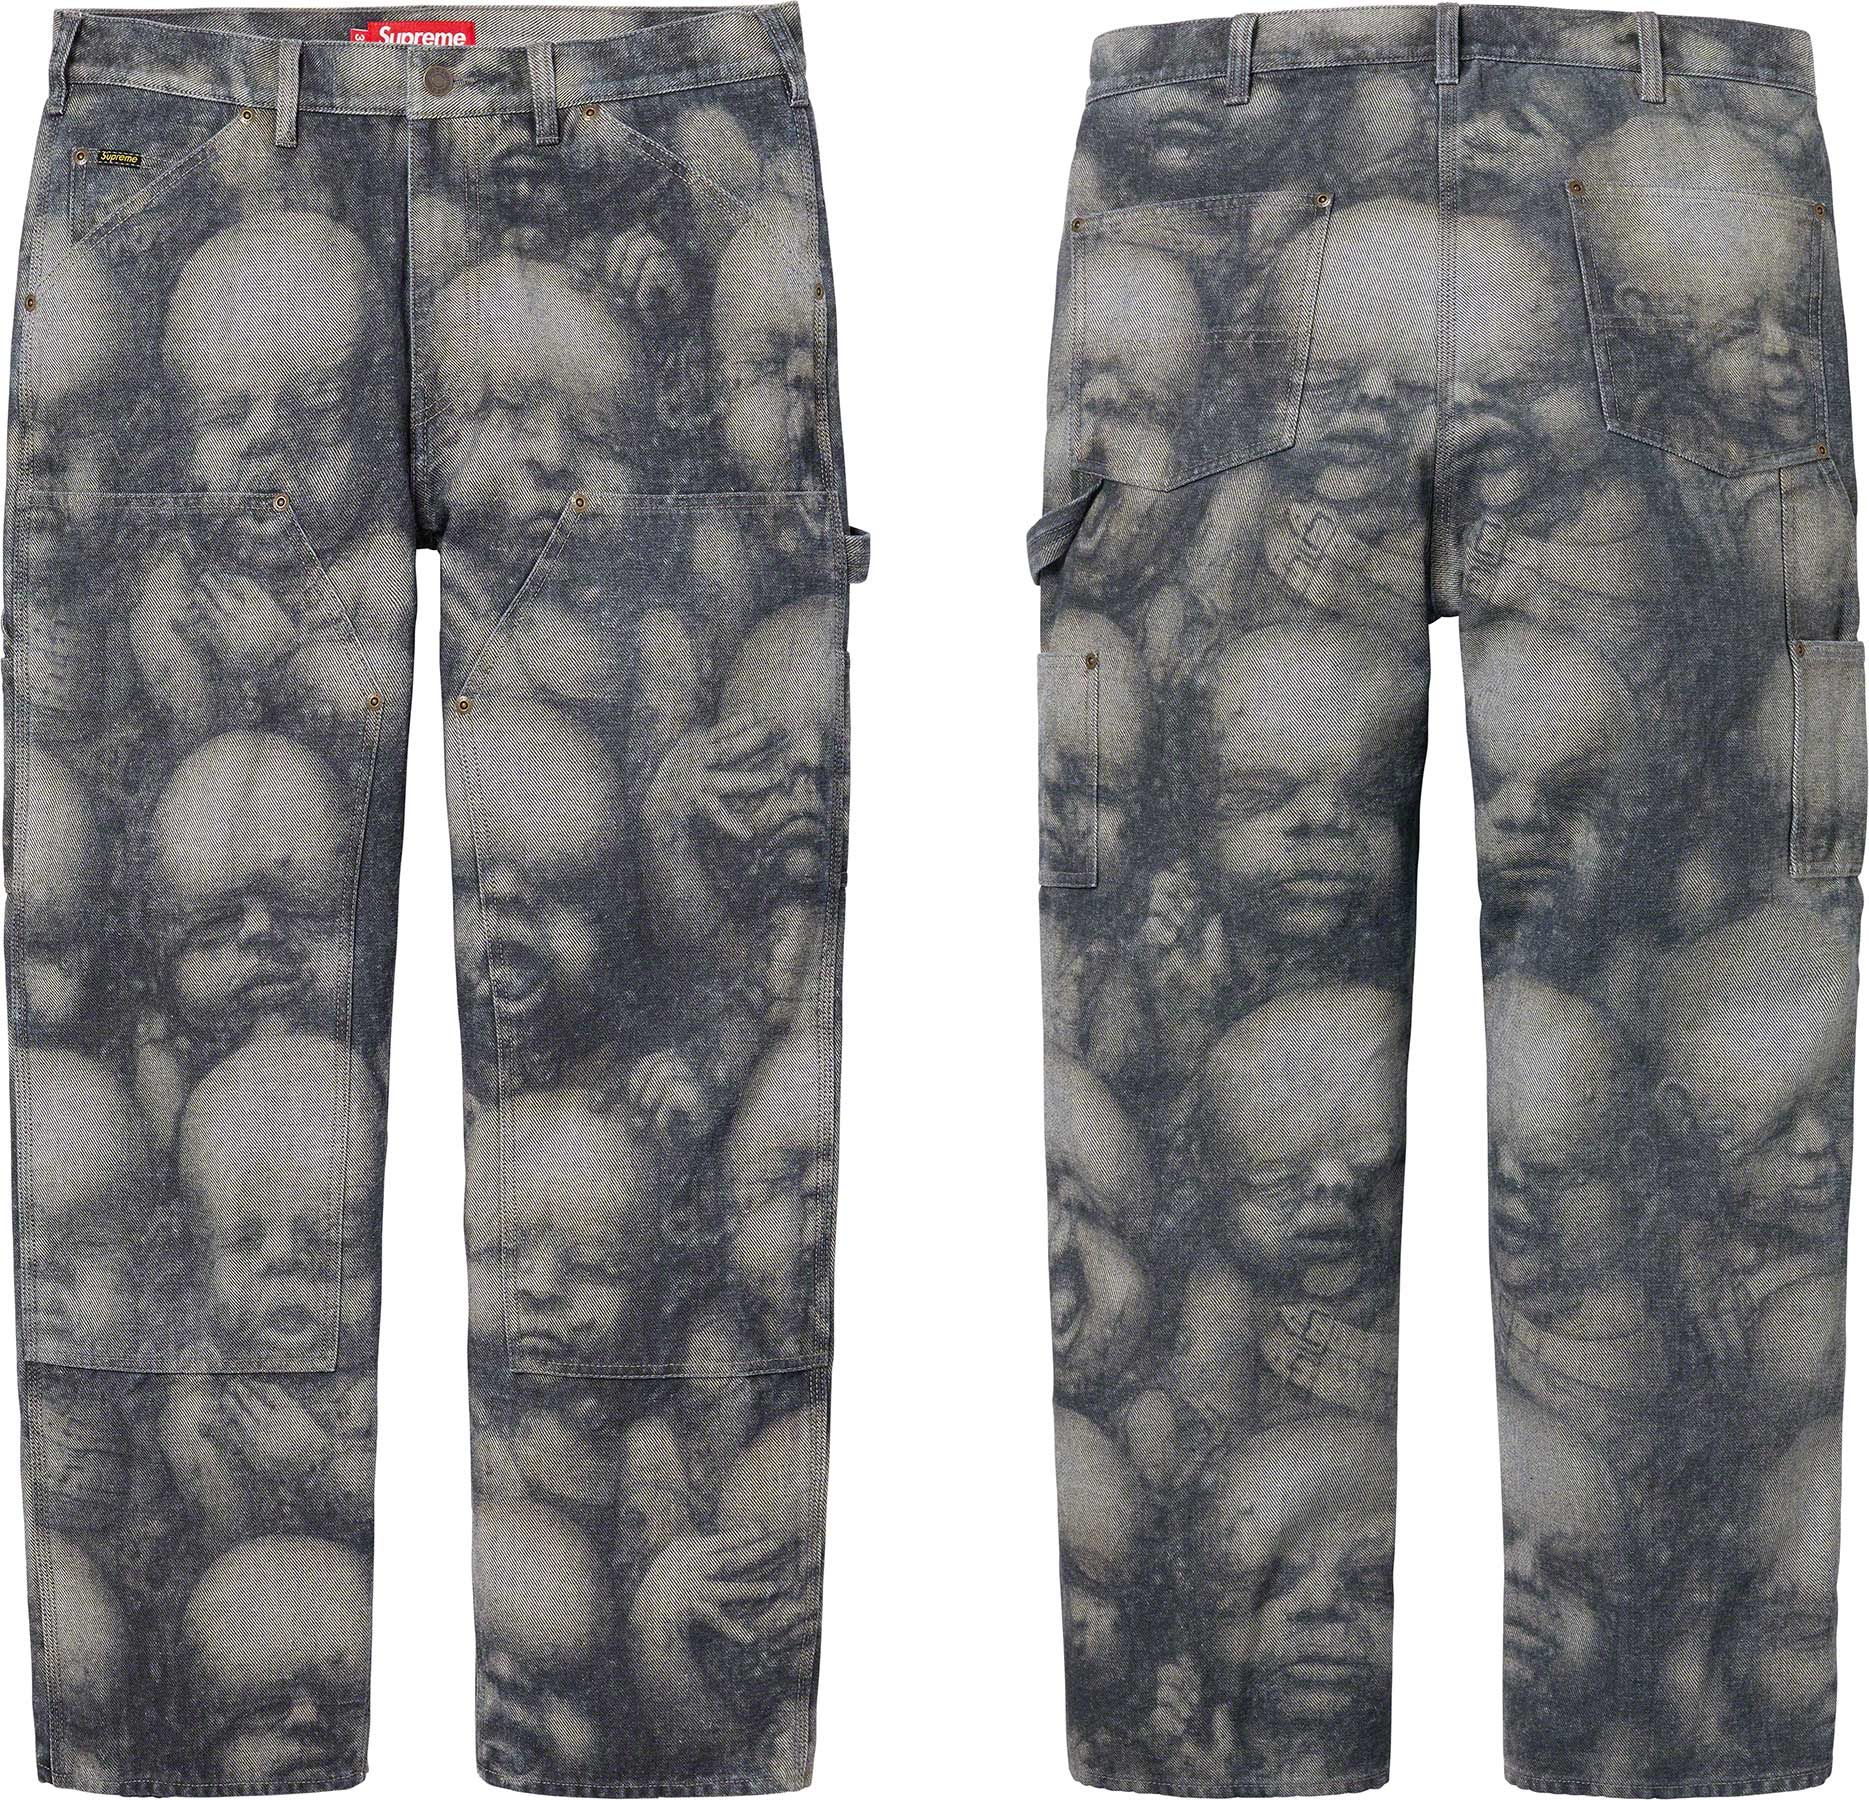 Supreme H.R. Giger Double Knee Jean取り置きは可能ですか